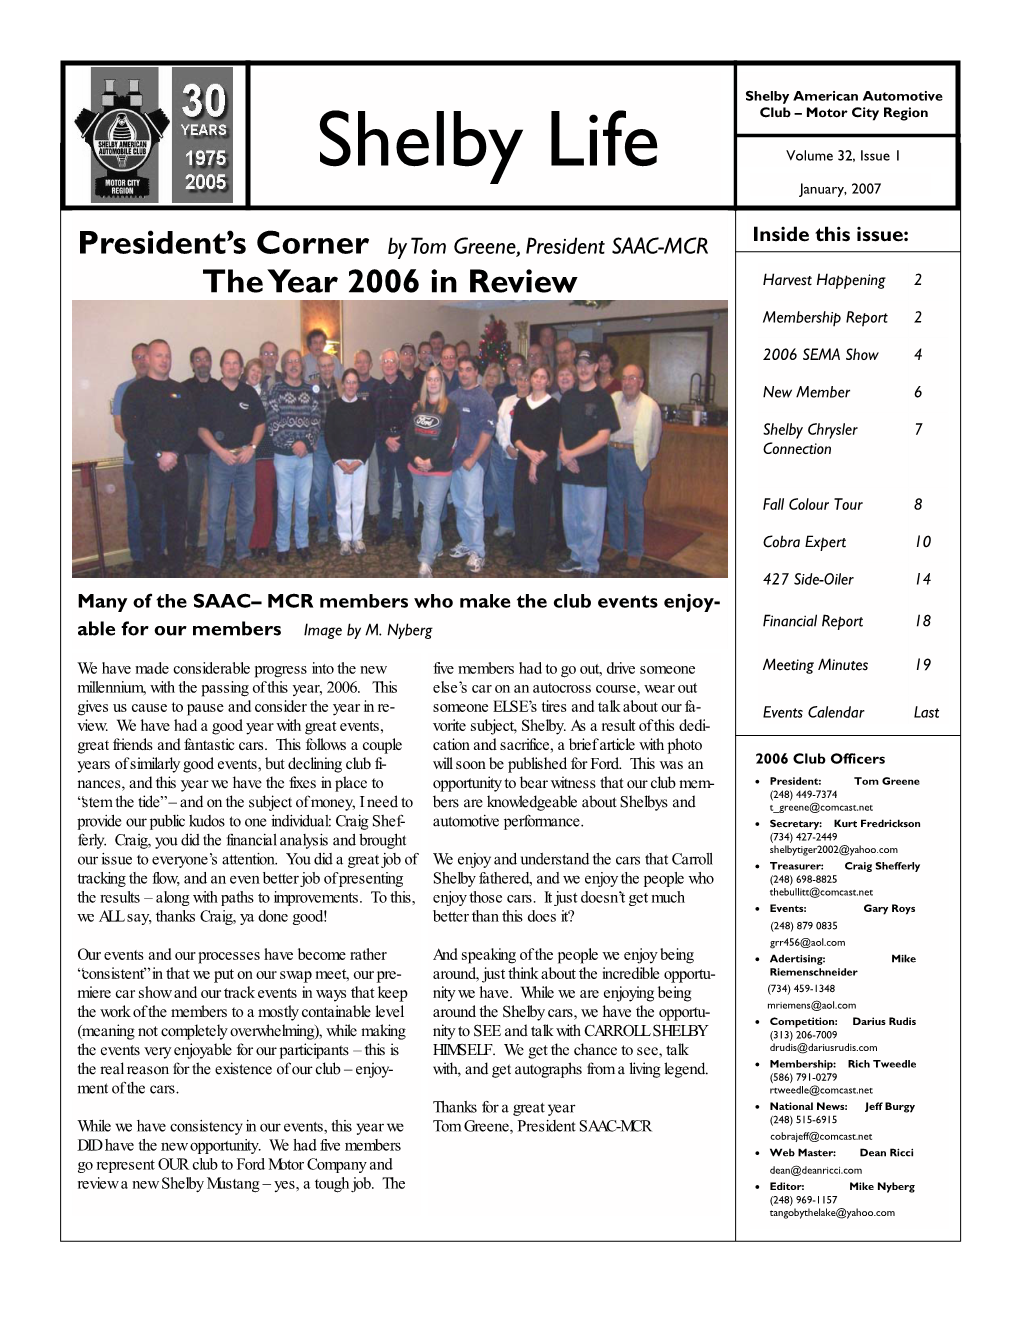 2007 Shelby Life Vol 32 Issue 1